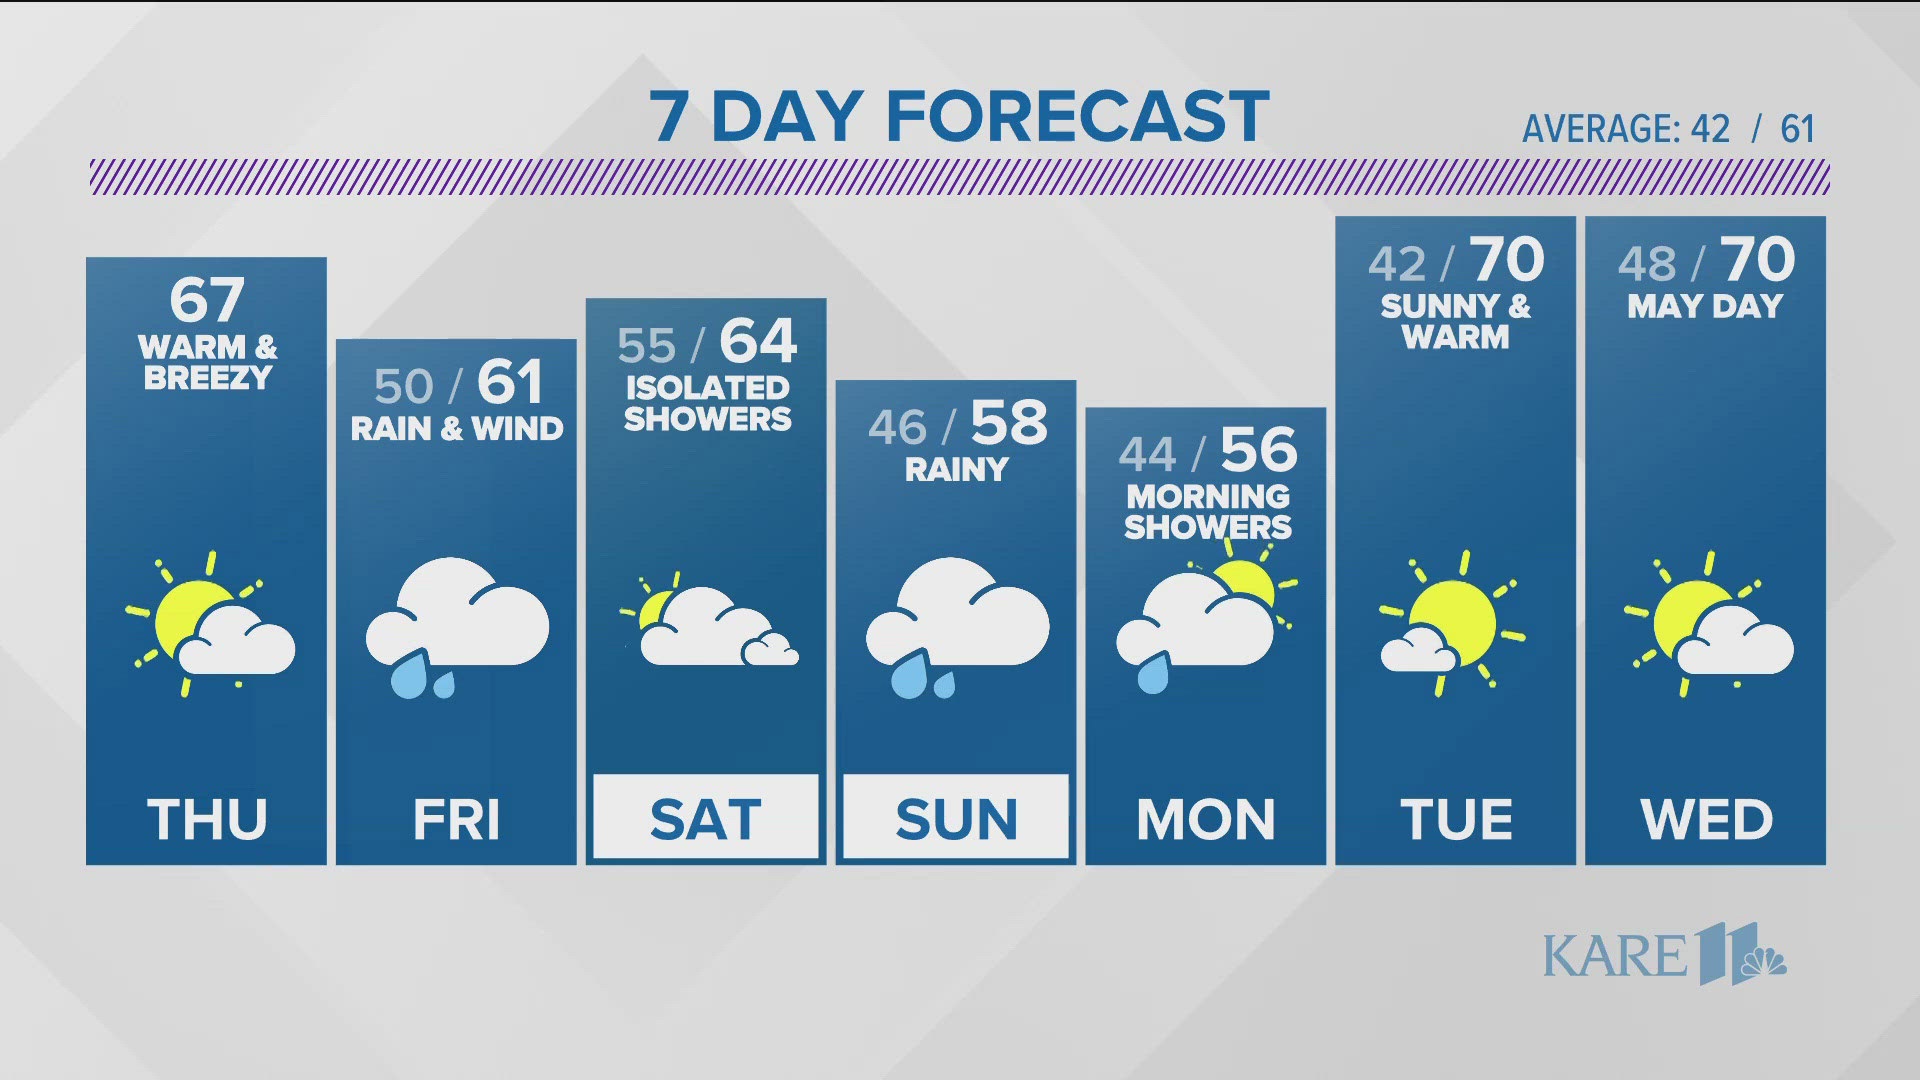 Waves of rain are expected on Friday and Sunday with a slight break Saturday.